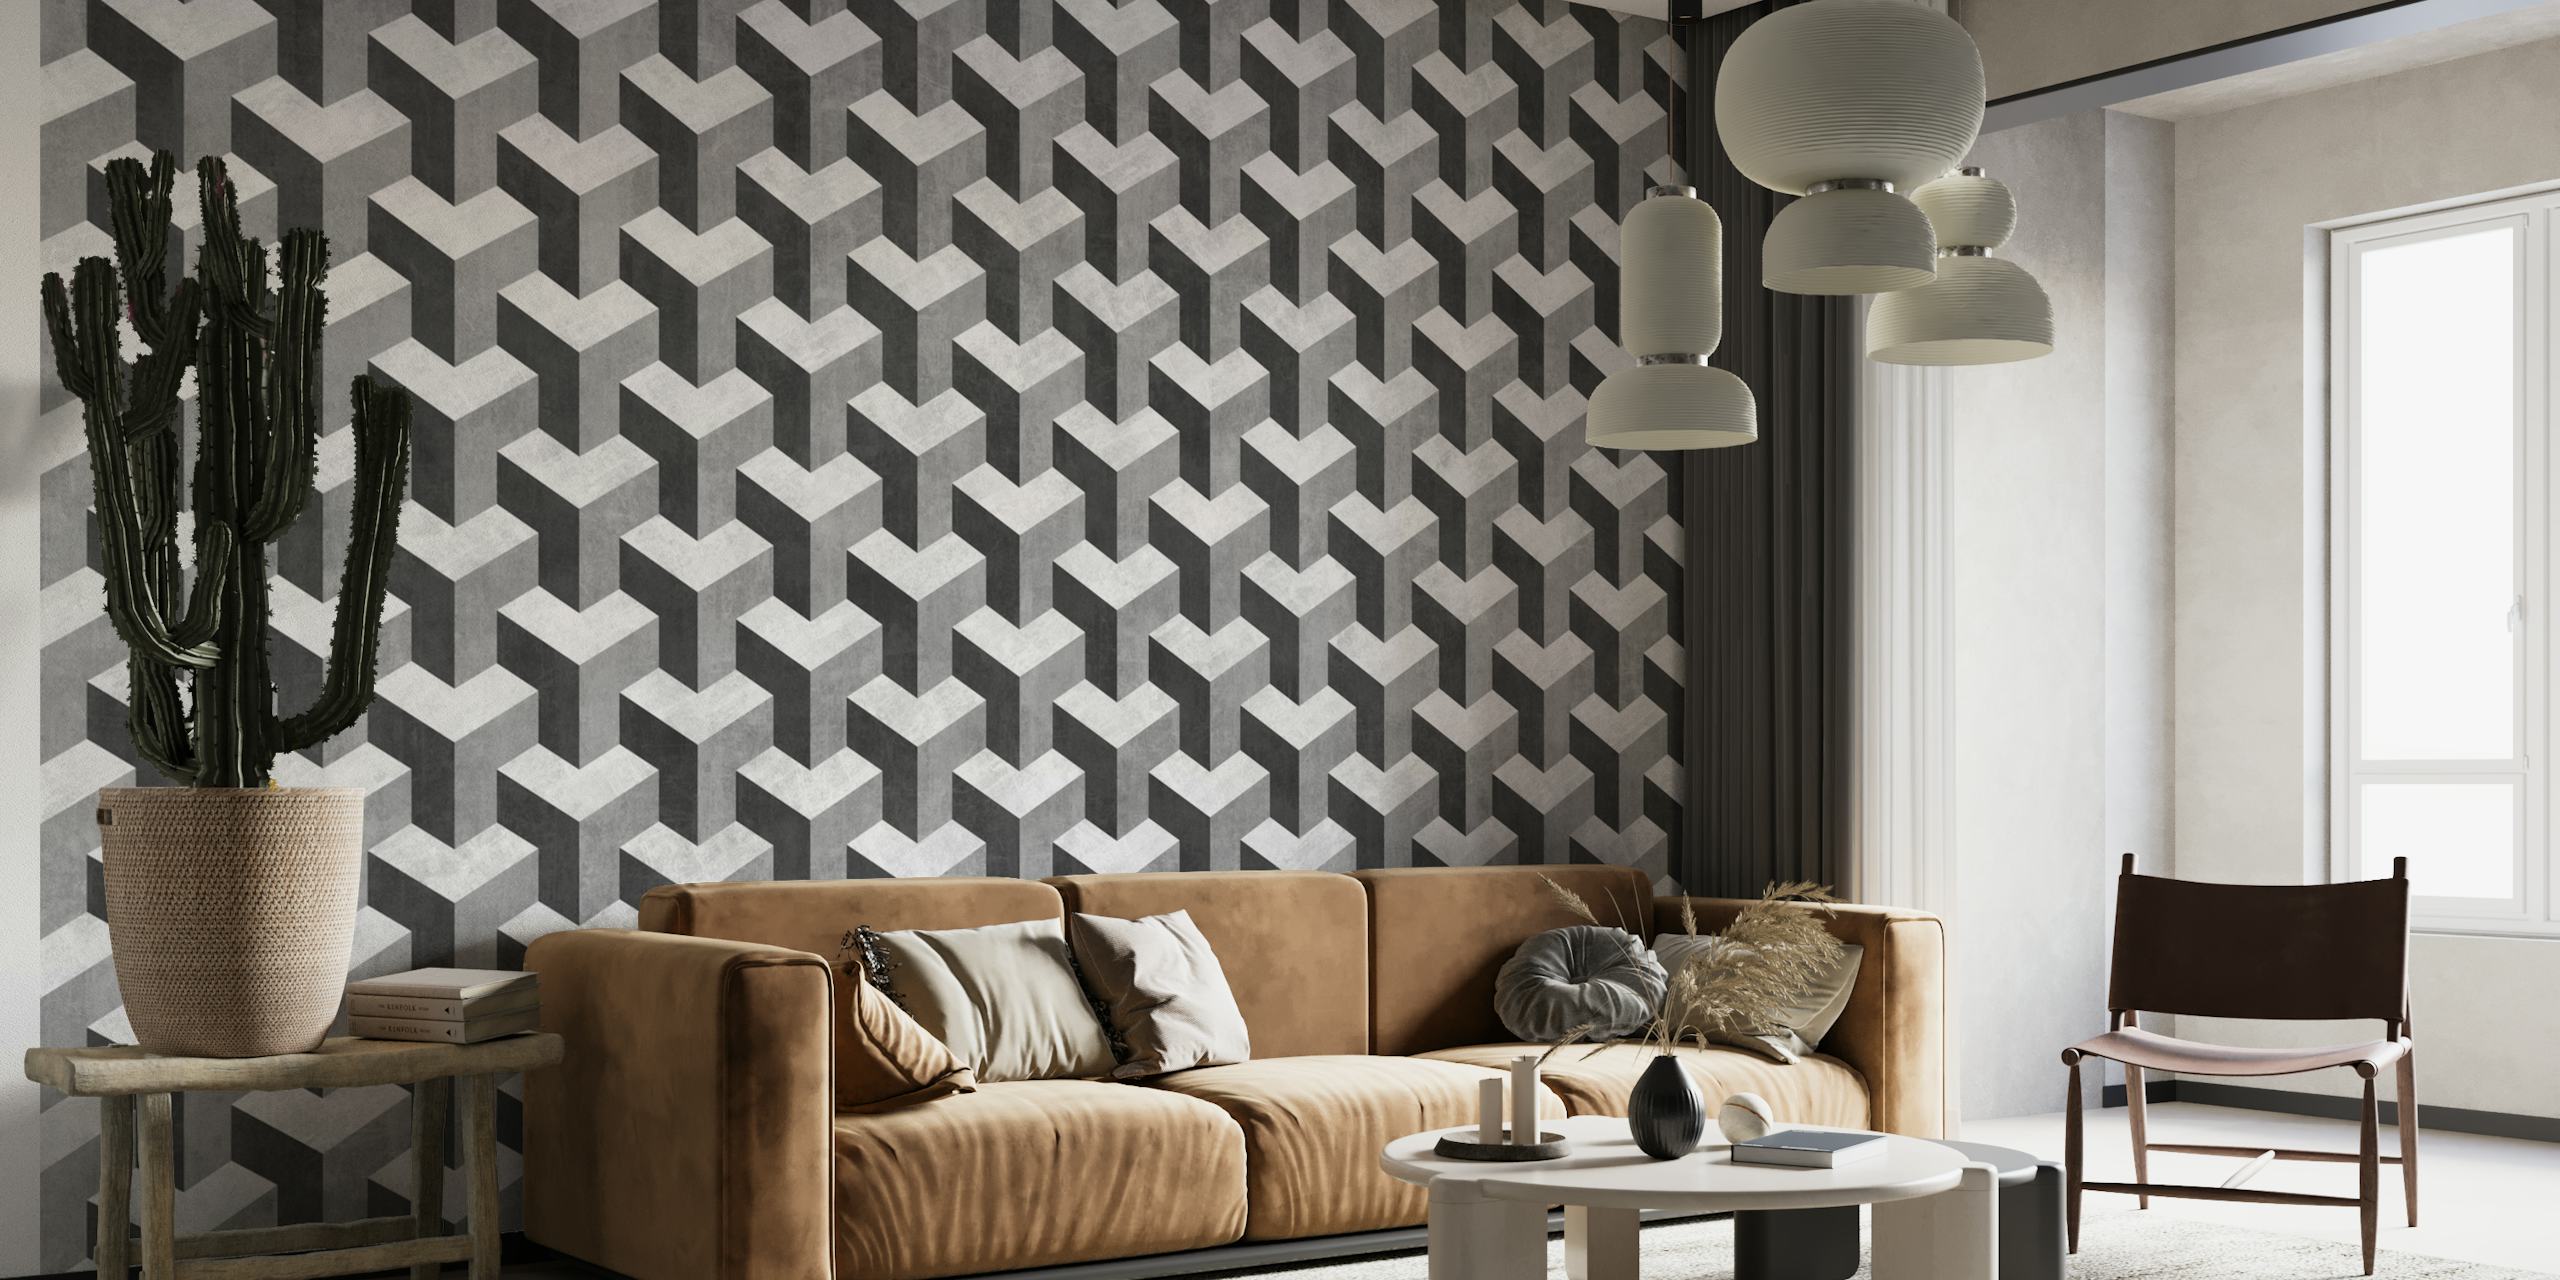 Interlocking Cubes wall mural with 3D geometric black and white pattern